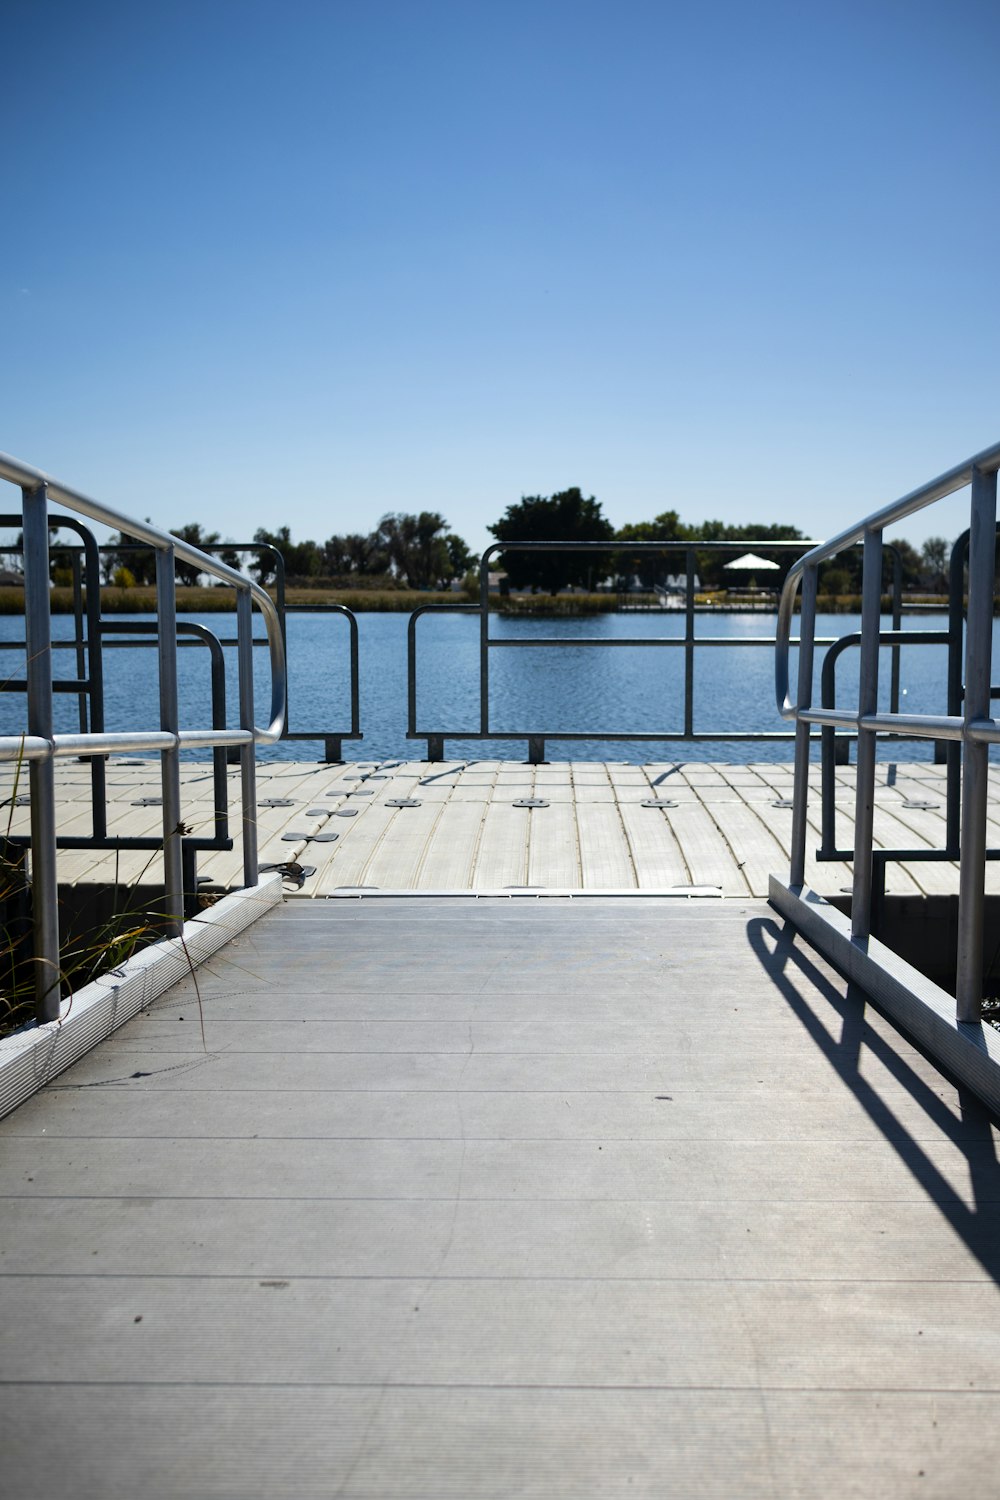 a wooden dock with metal railings next to a body of water